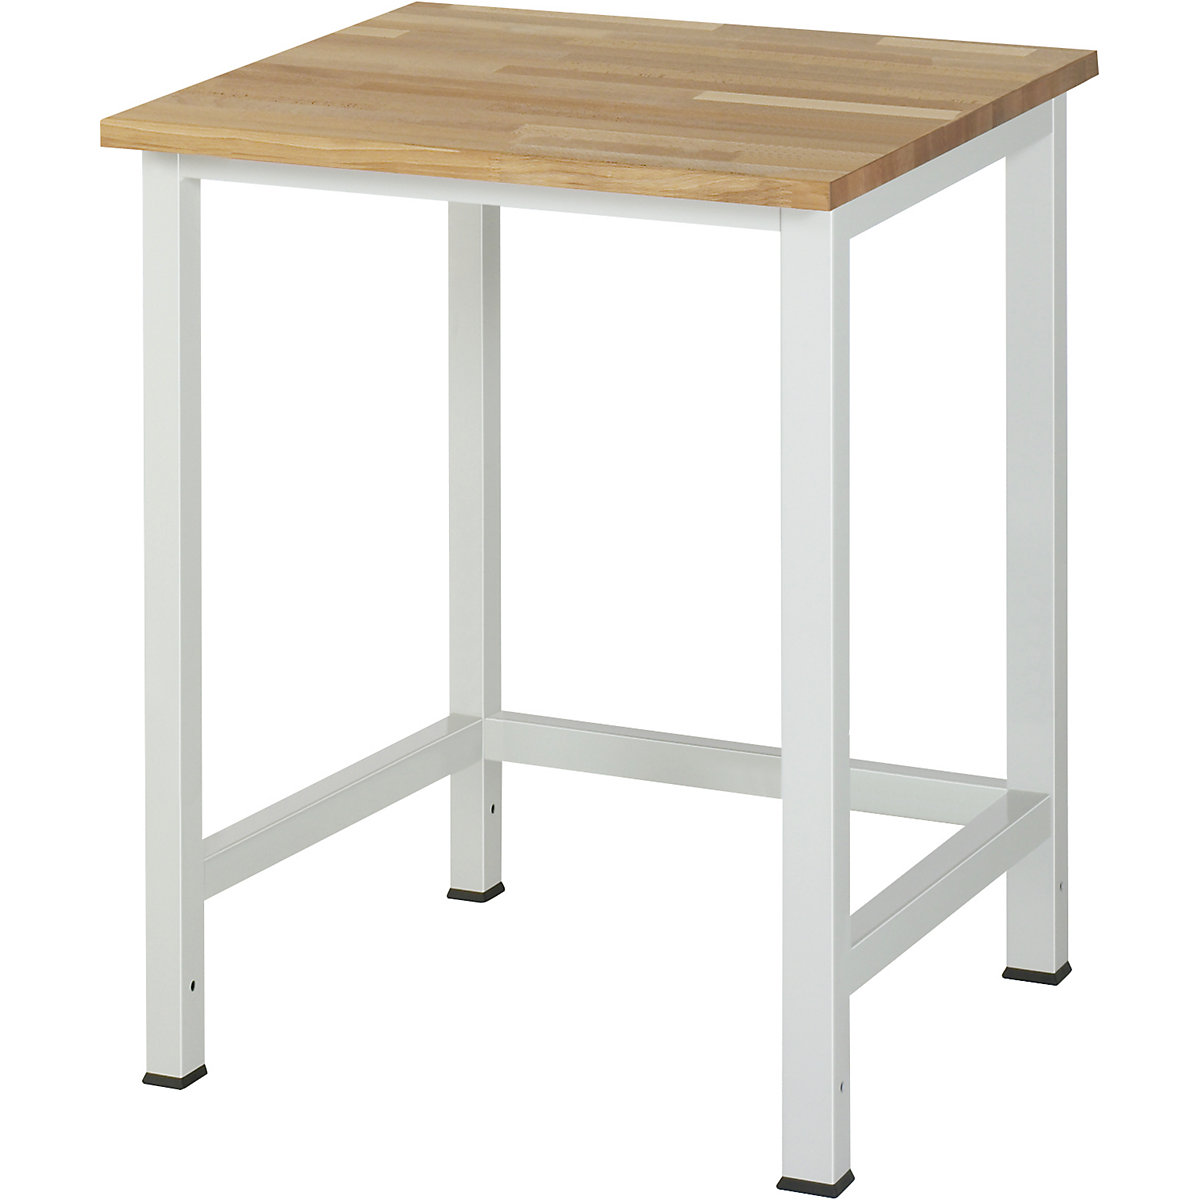 Work table for Series 900 workplace system – RAU